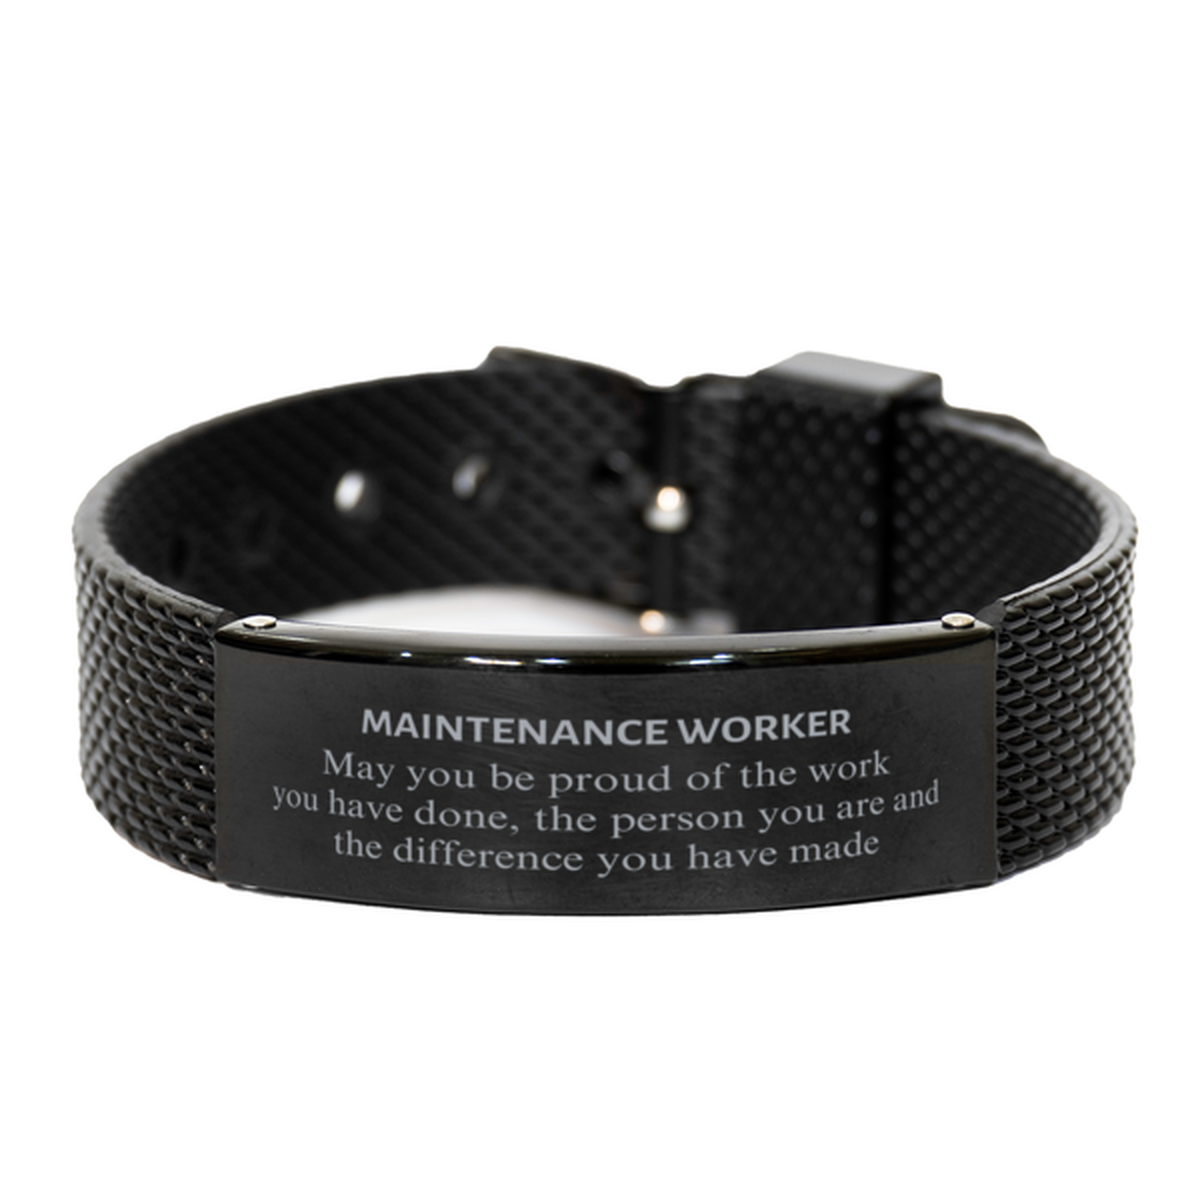 Maintenance Worker May you be proud of the work you have done, Retirement Maintenance Worker Black Shark Mesh Bracelet for Colleague Appreciation Gifts Amazing for Maintenance Worker